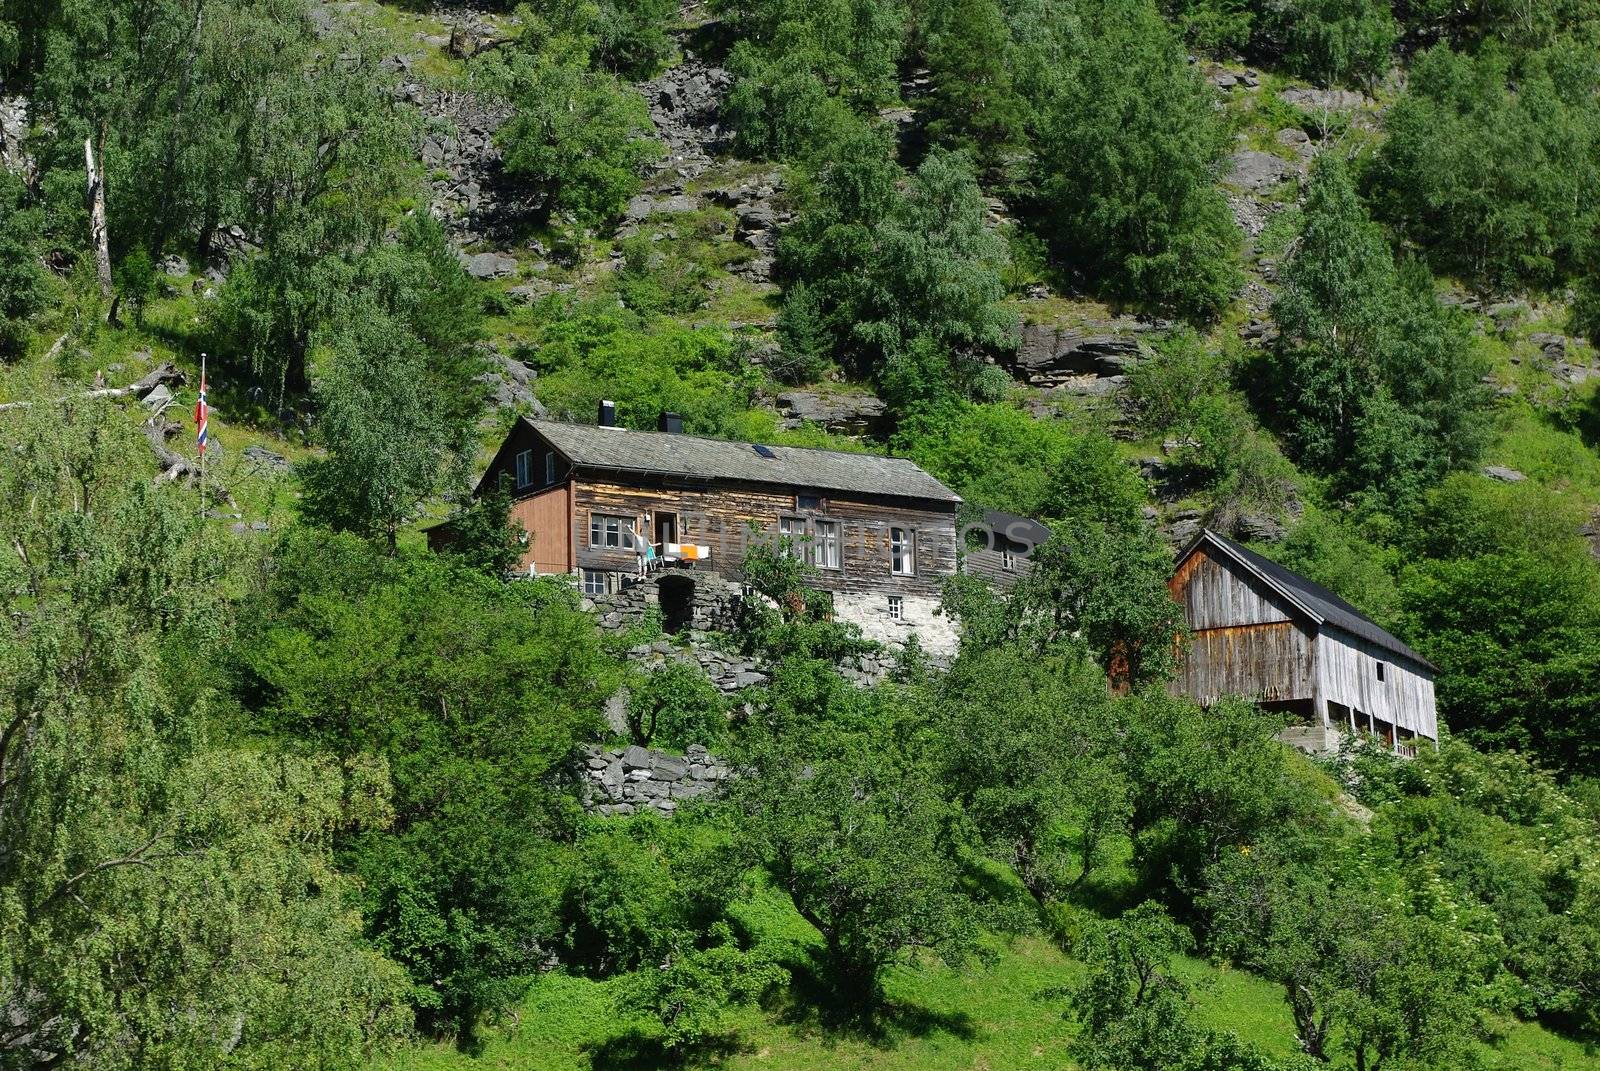 Traditional wooden houses on hillside near Geiranger, Norway